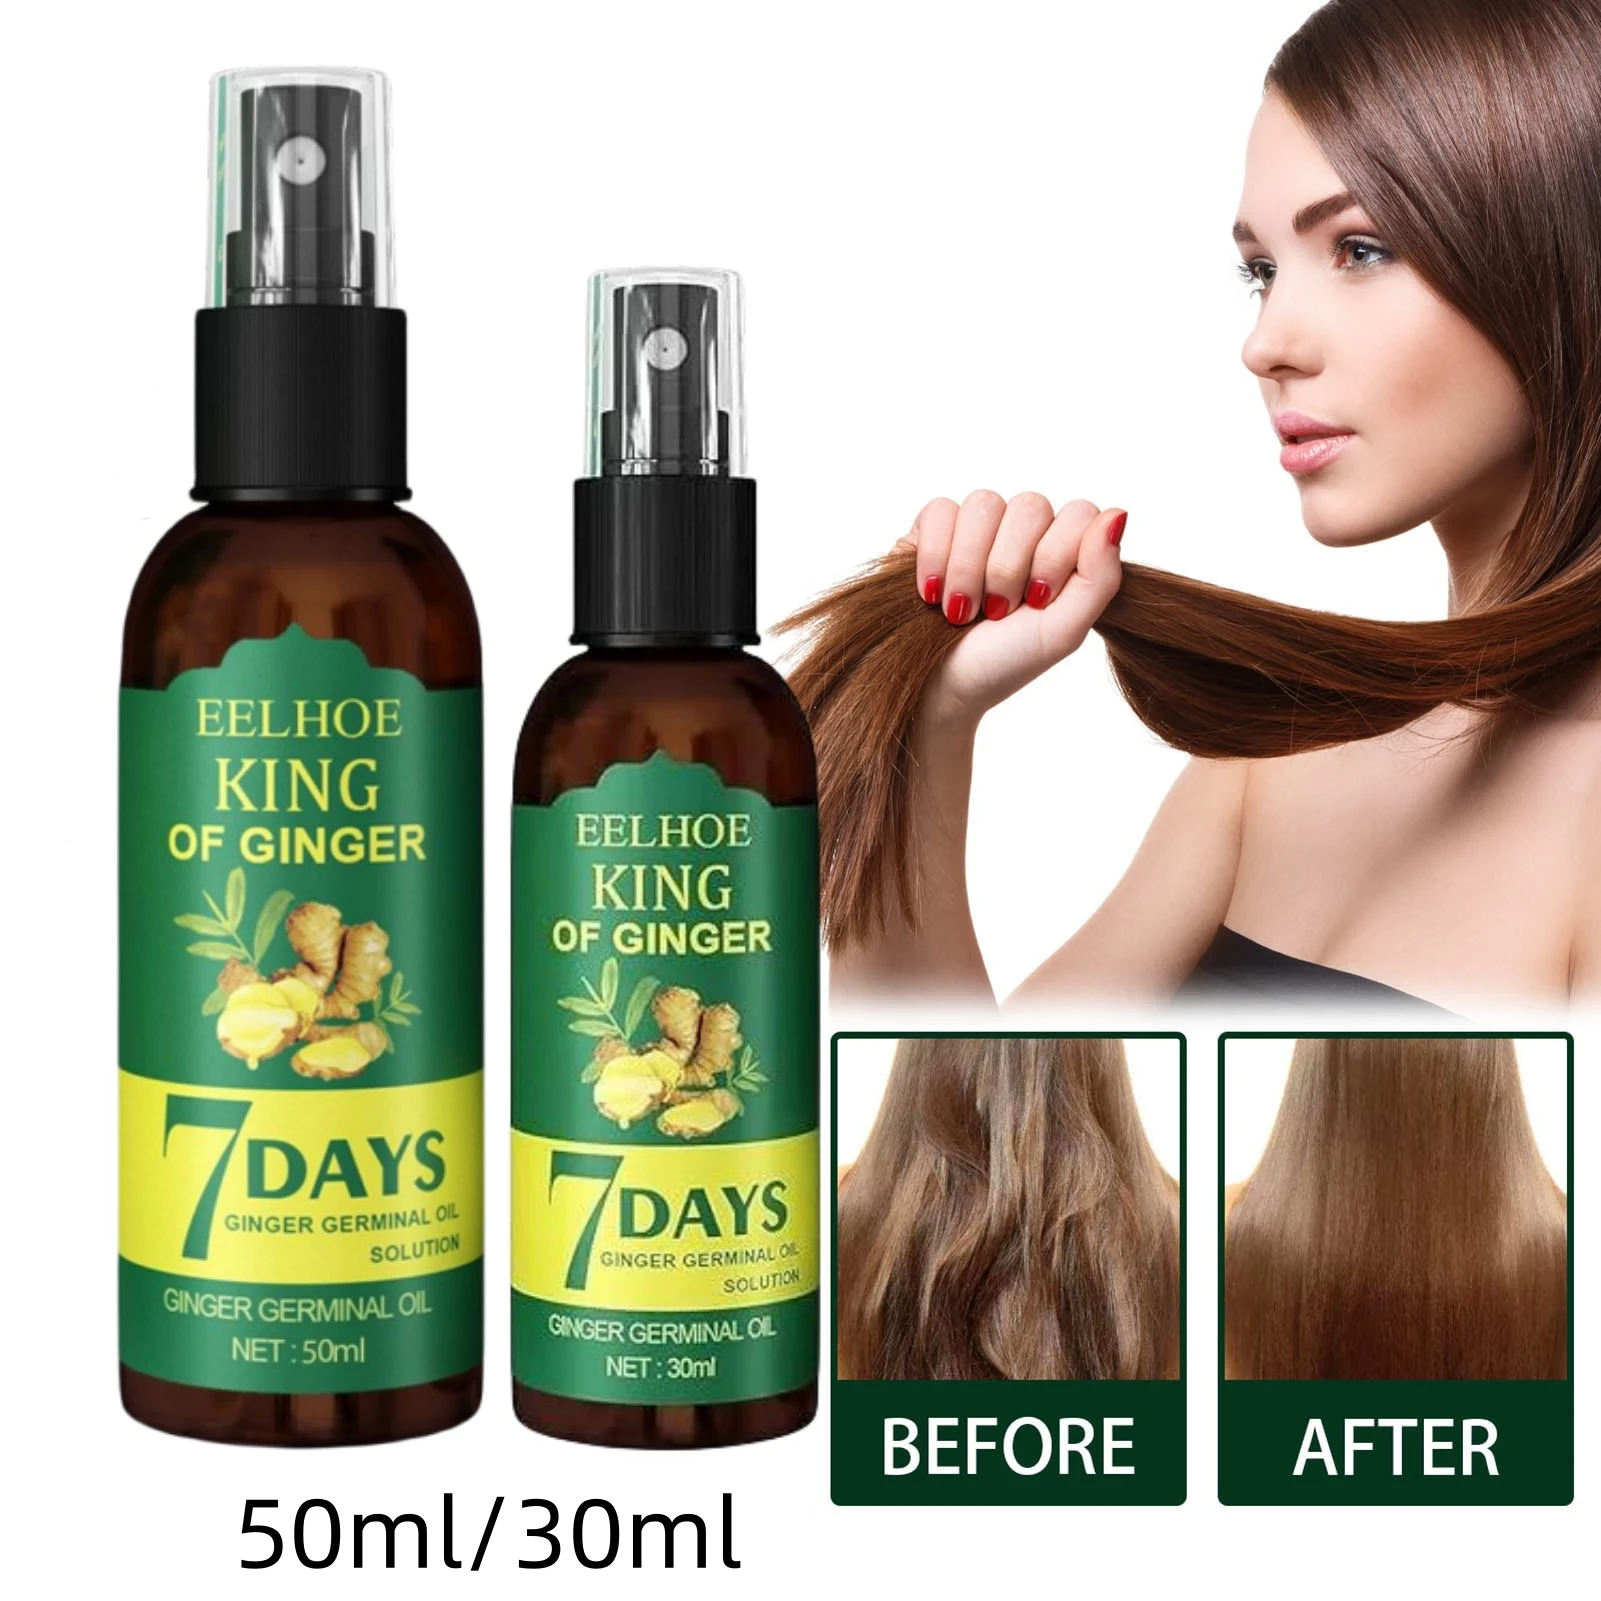 

EELHOE King of Ginger Germinal Oil 7 Days Scalp Damaged Anti-loss Hair Fast Regrowth Strengthen Hair Texture Improve Frizzy